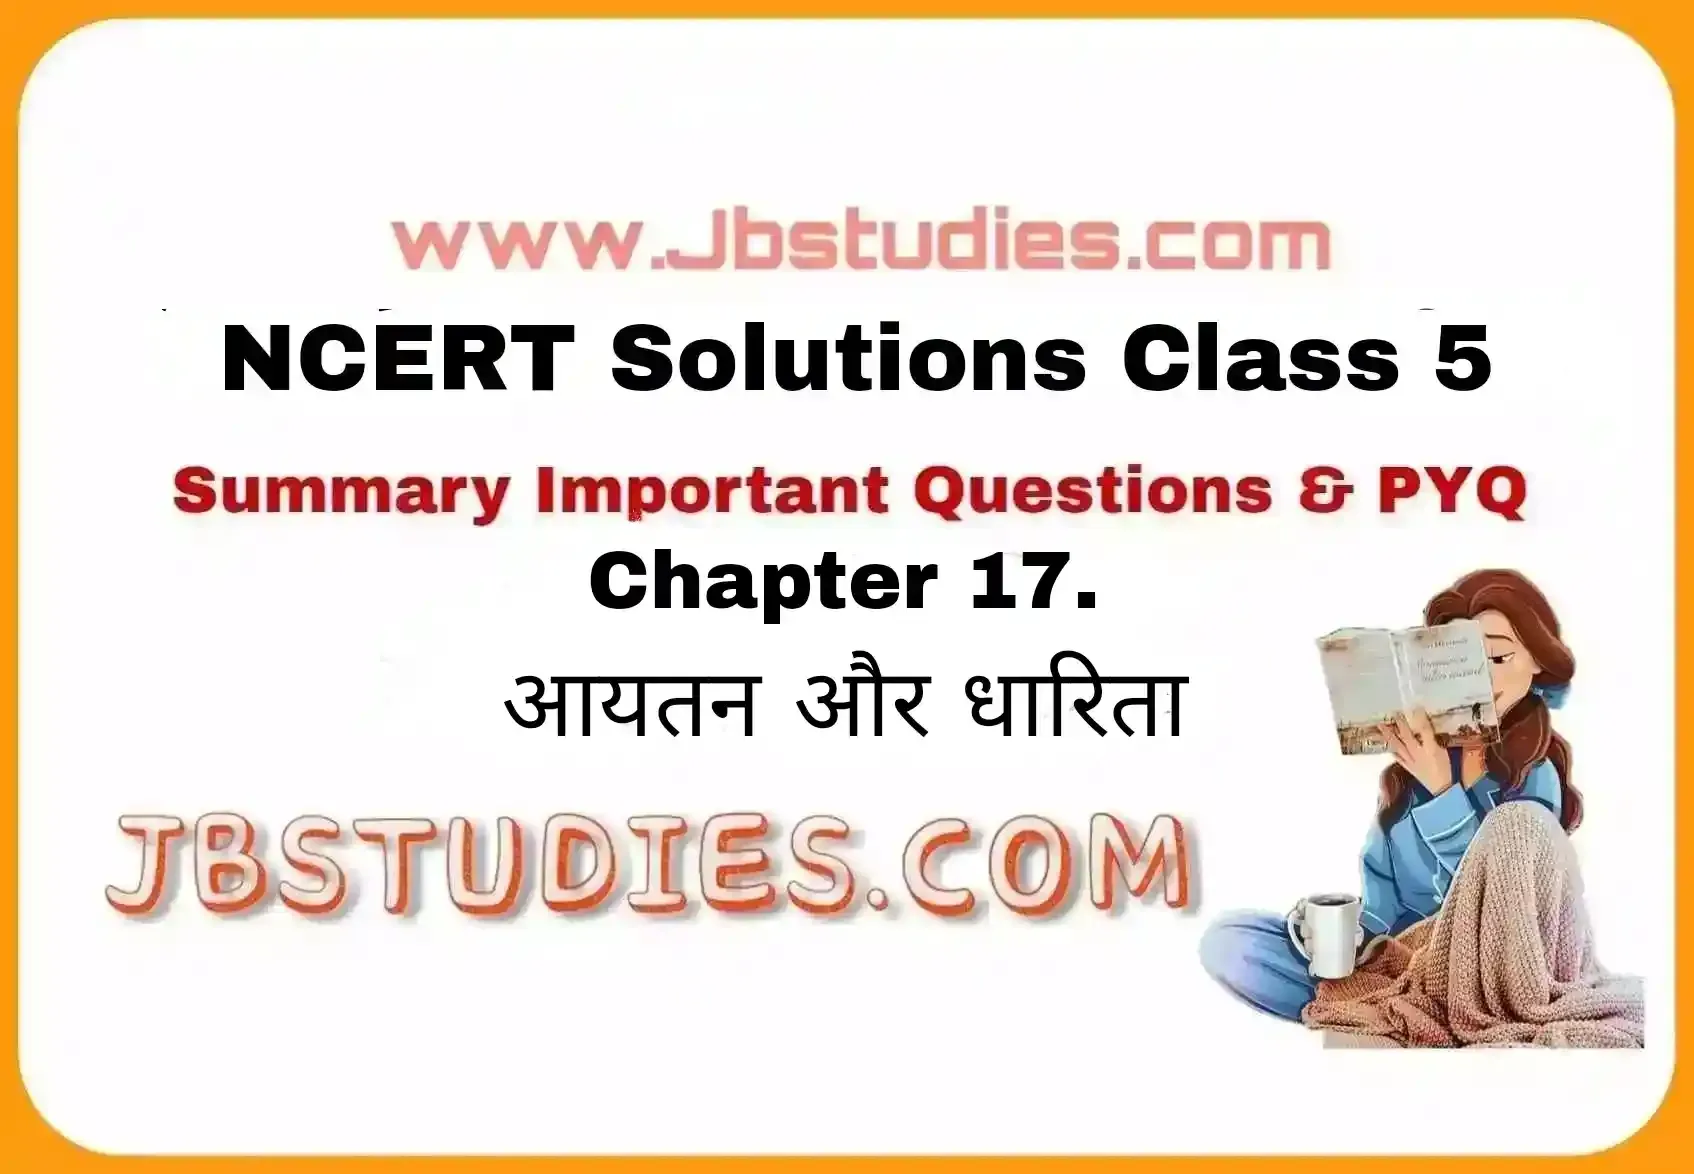 Solutions Class 5 गणित गिनतारा Chapter-17 (आयतन और धारिता)